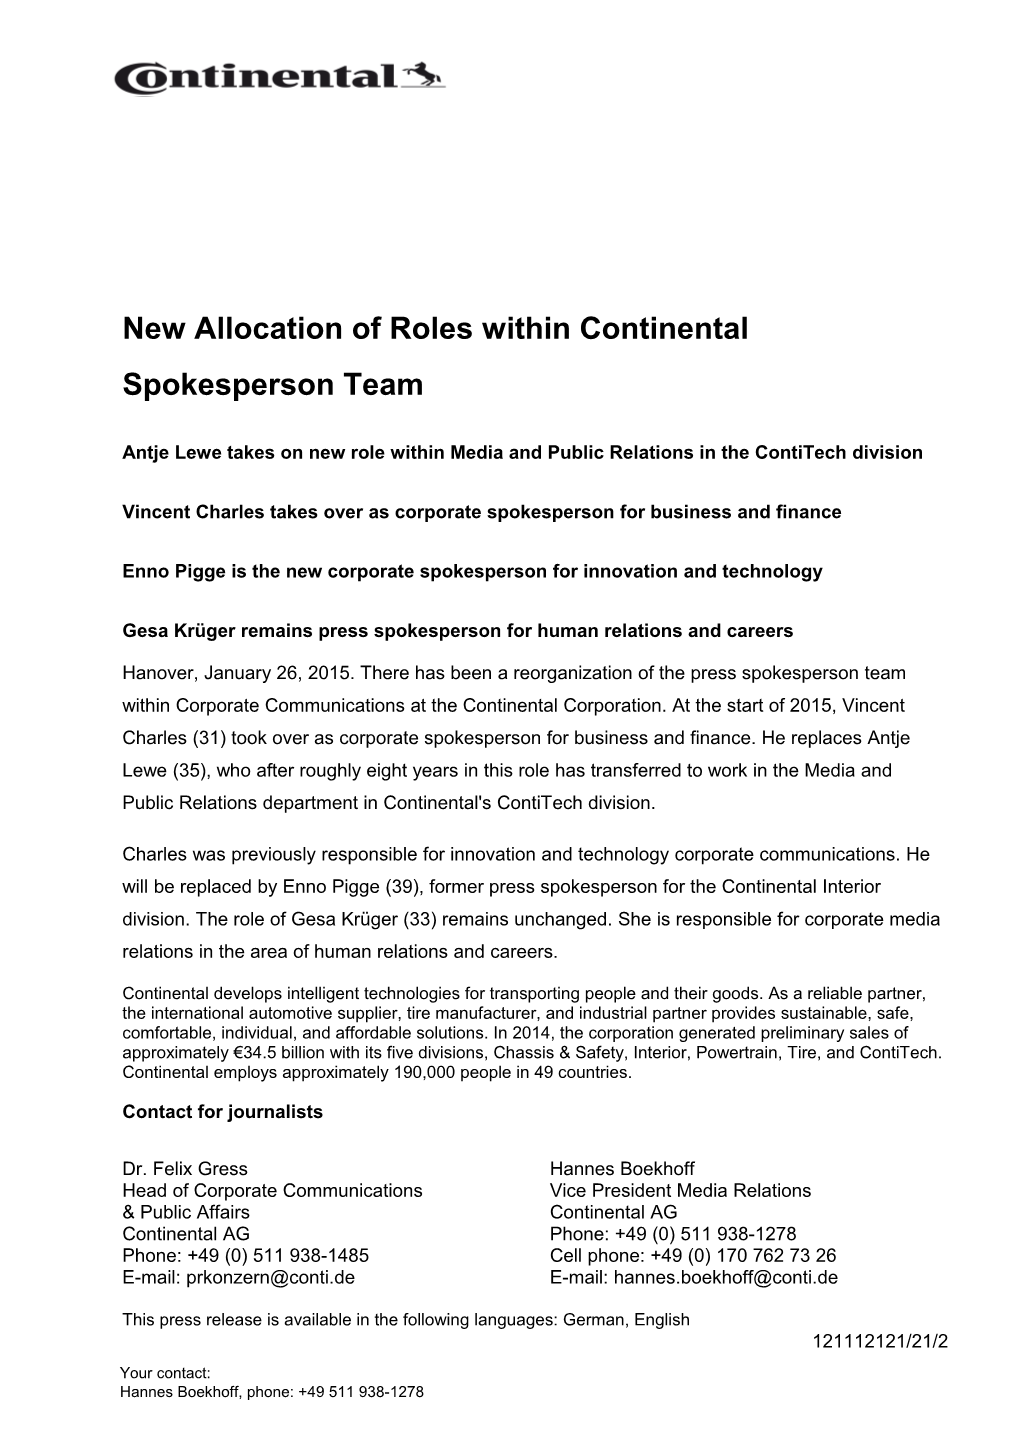 New Allocation of Roles Within Continental Spokesperson Team